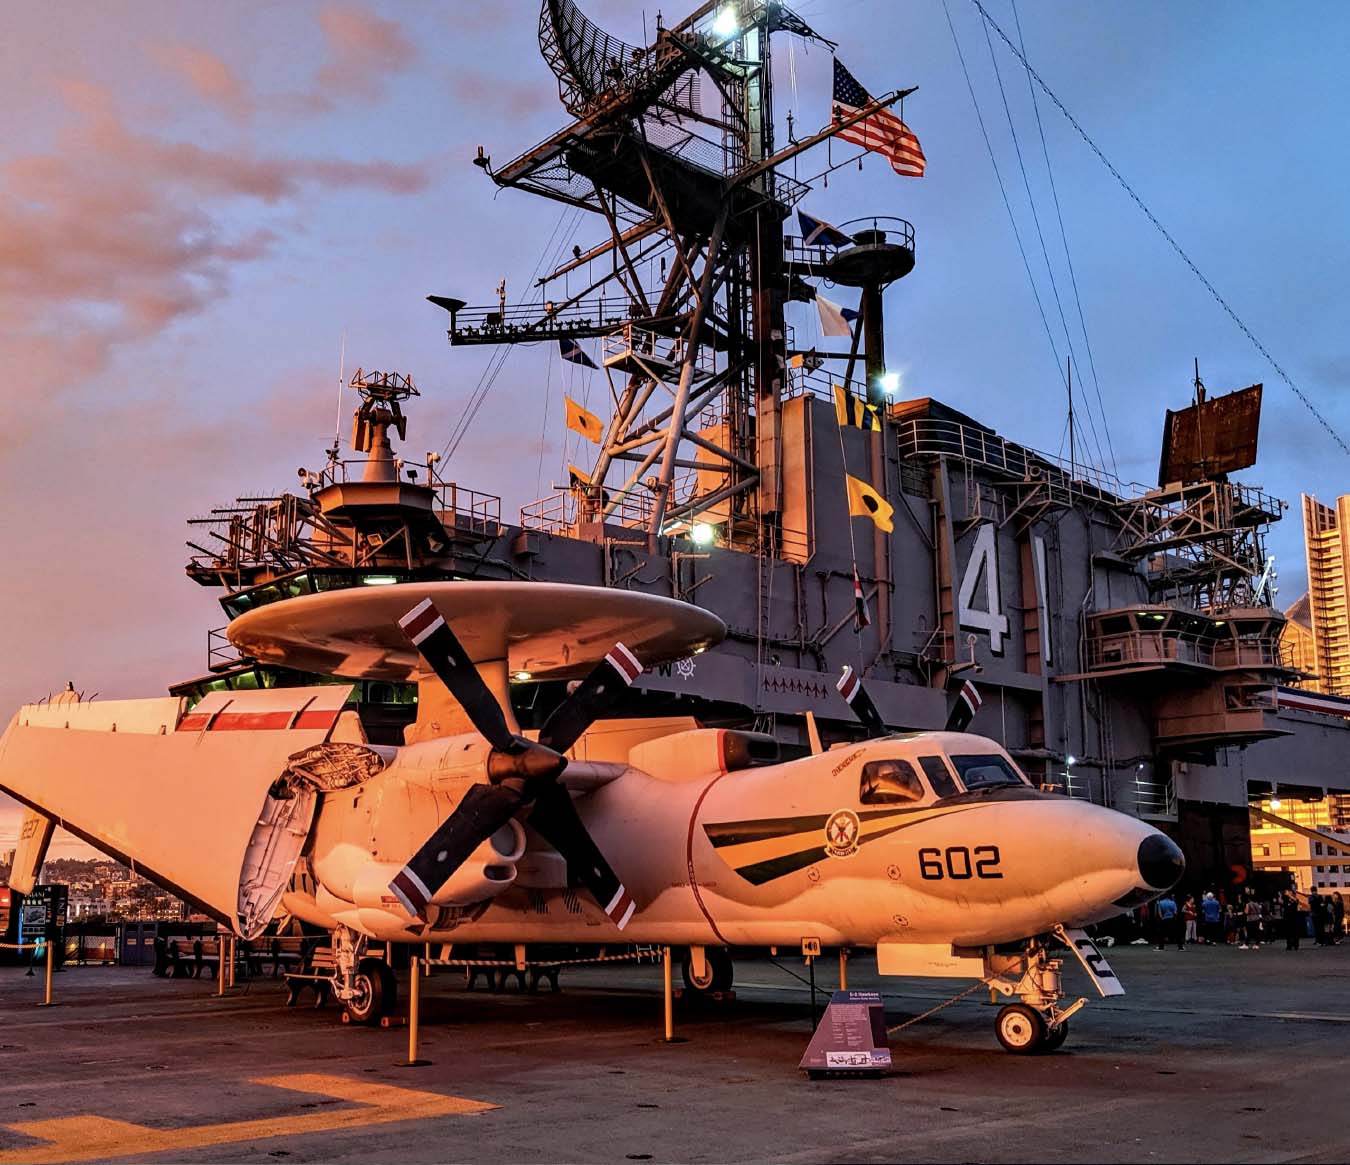 Things to Do in San Diego - USS Midway Museum